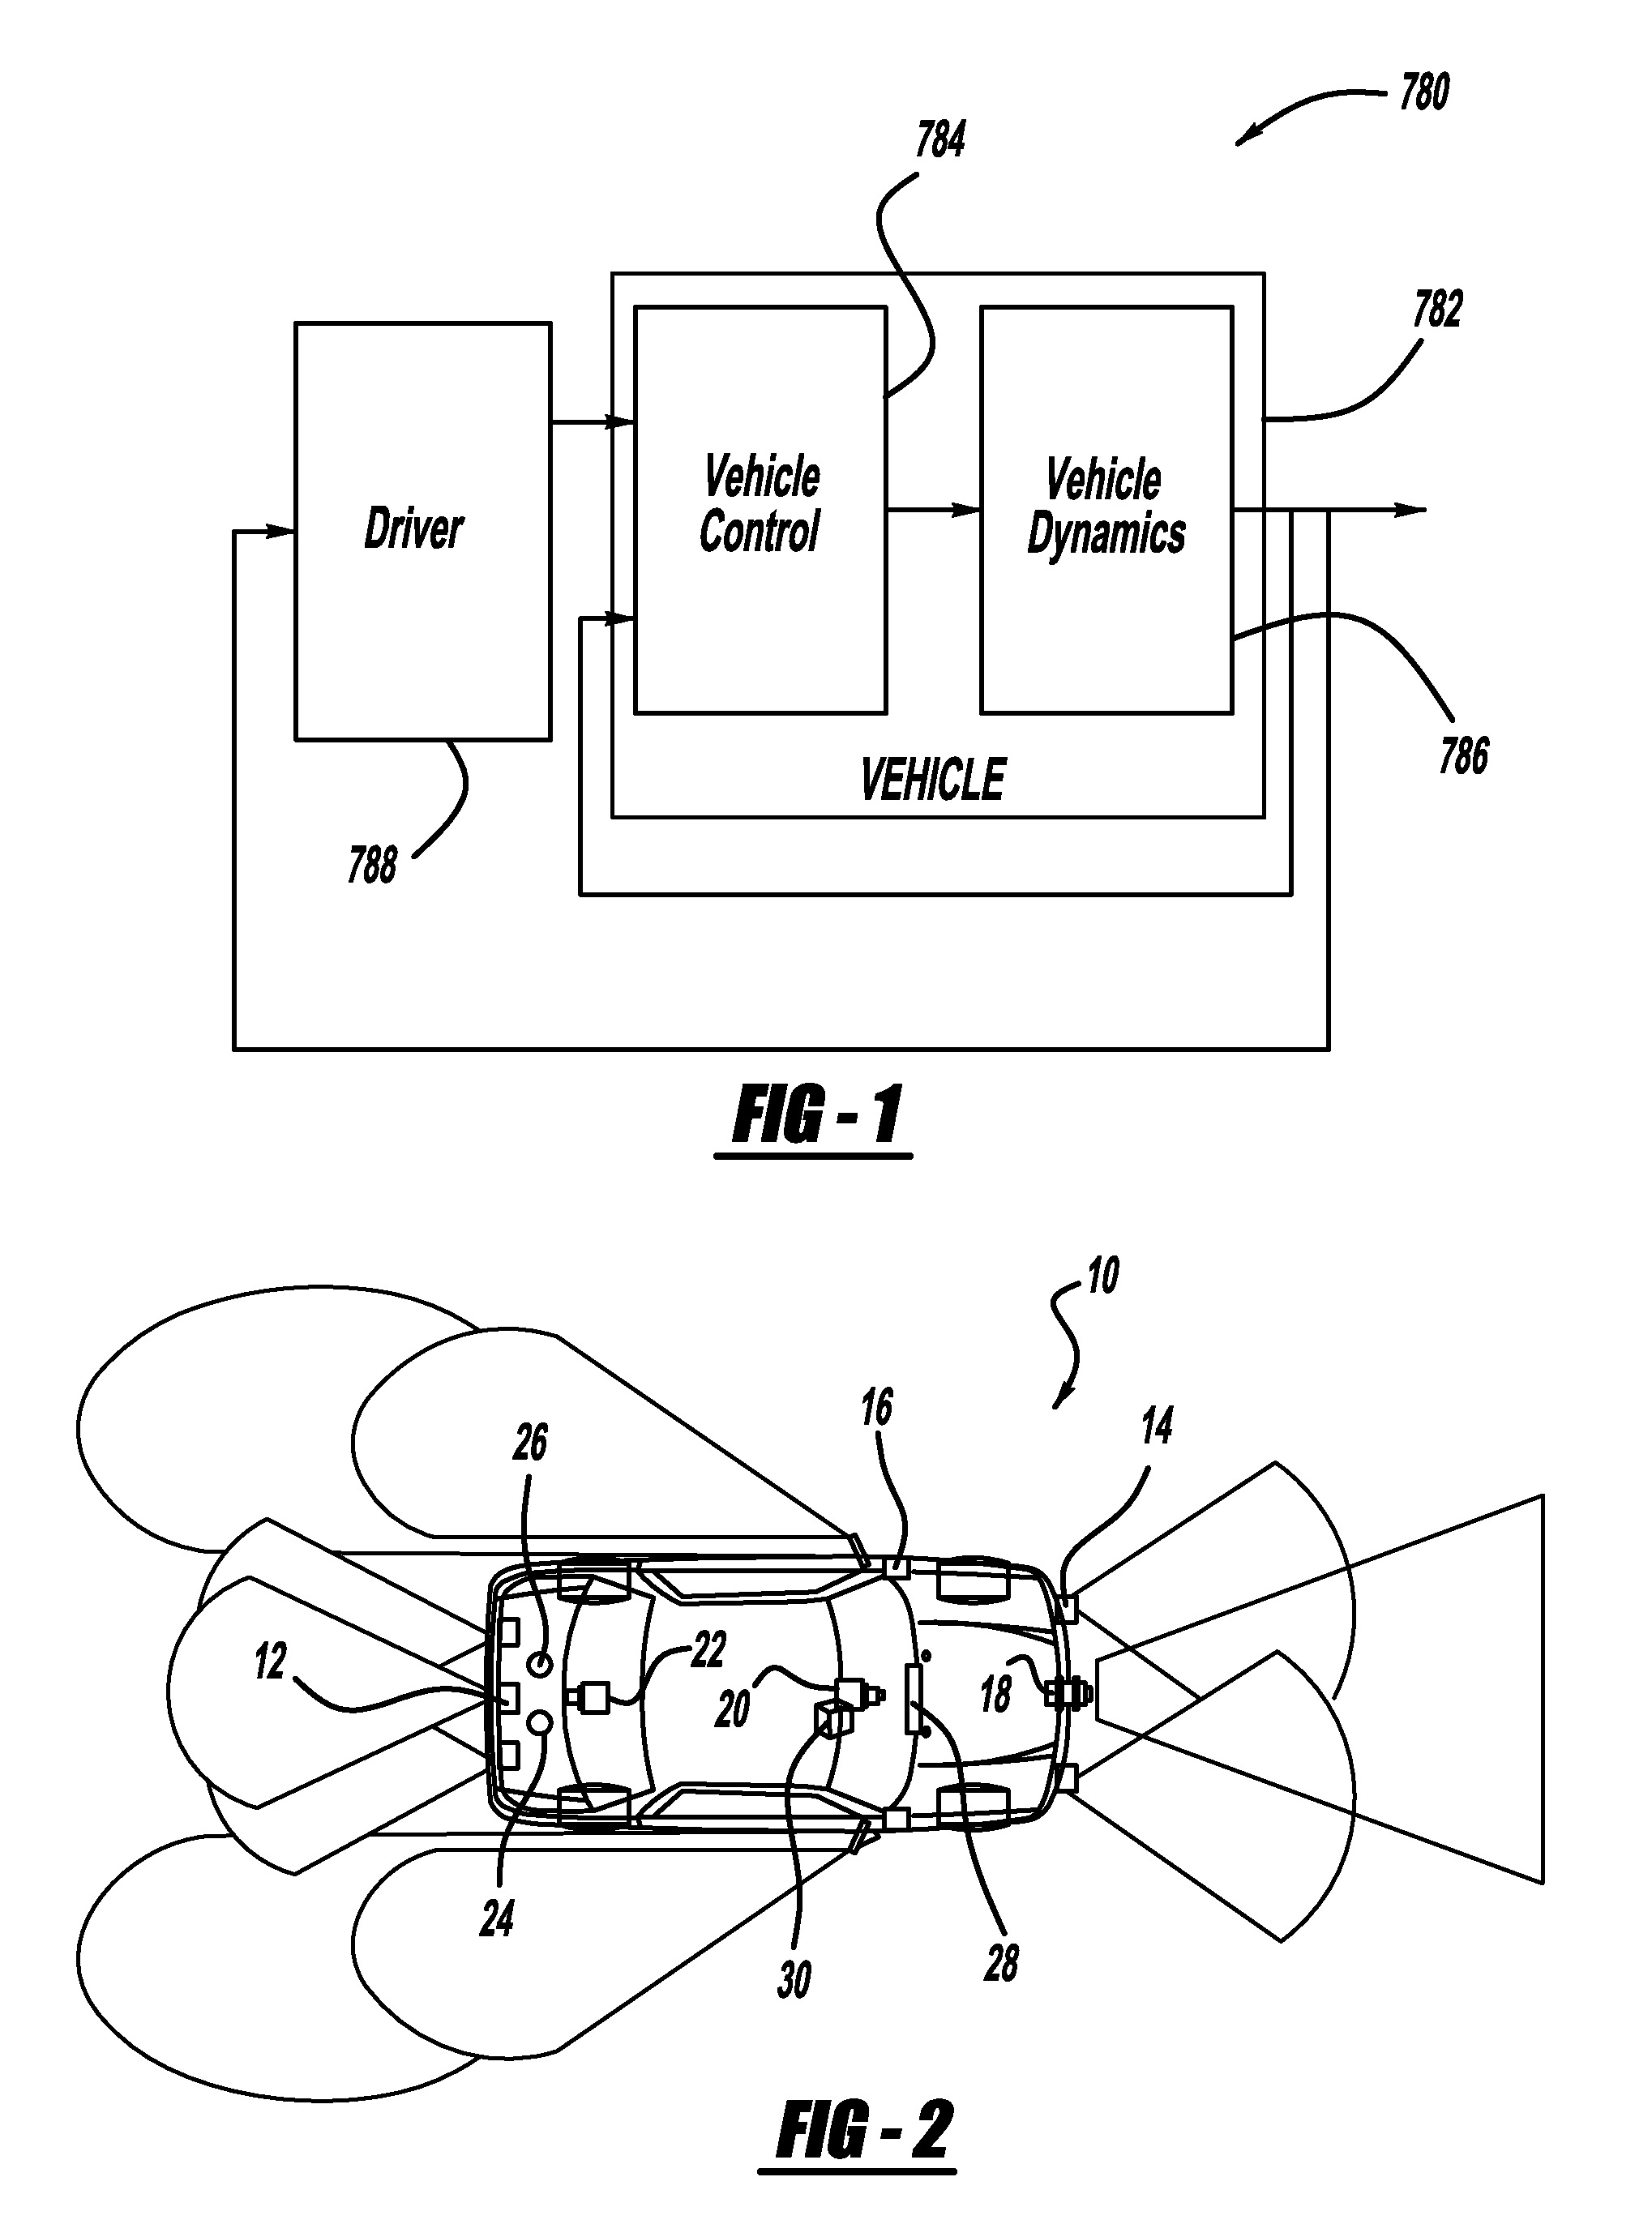 Vehicle stability enhancement control adaptation to driving skill based on passing maneuver